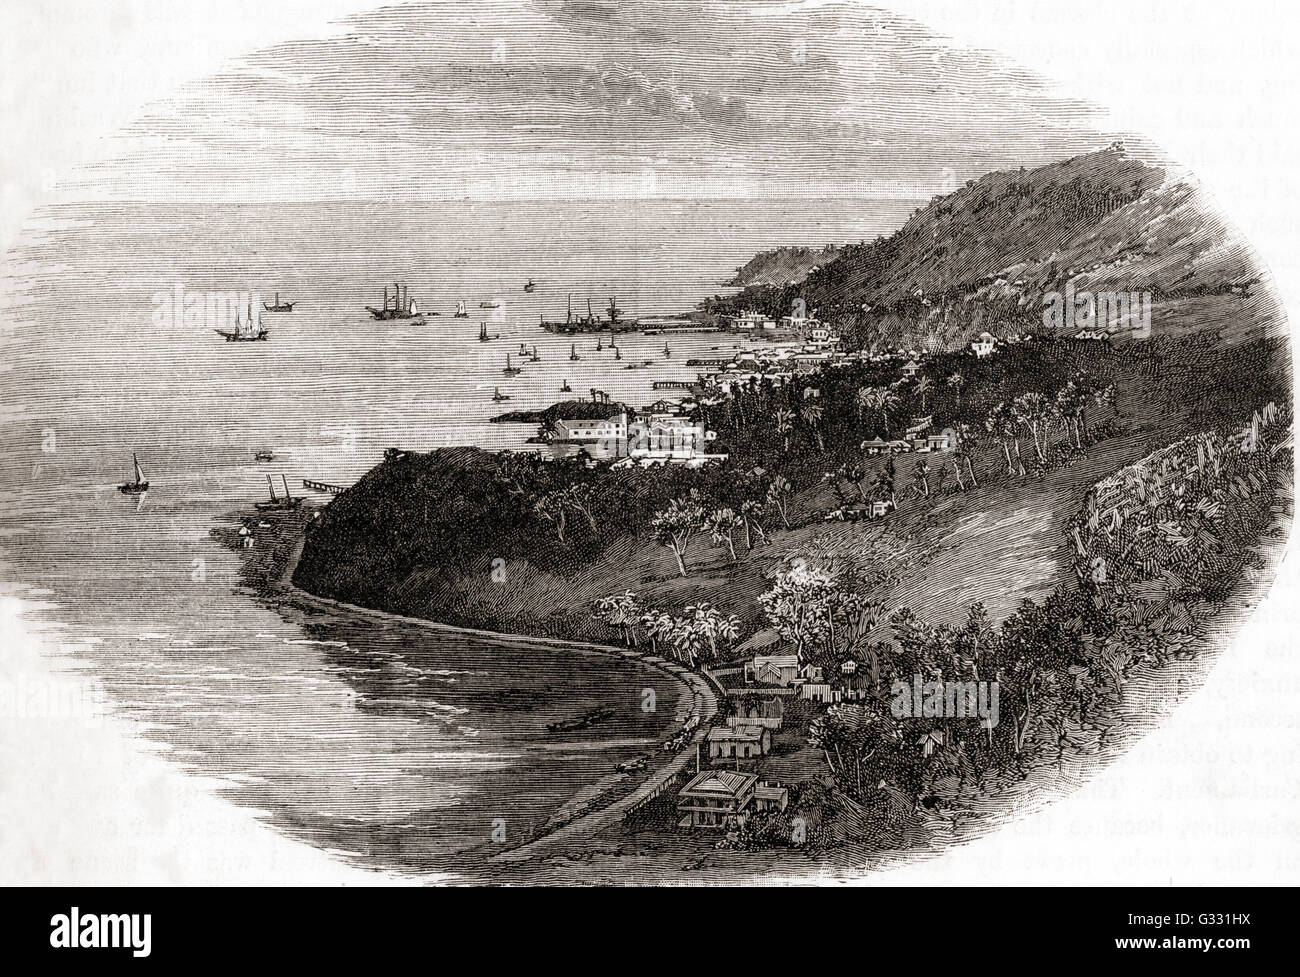 A view of Levuka, Island of Ovalau, Fiji Islands at the time of the annexation in 1875. Stock Photo